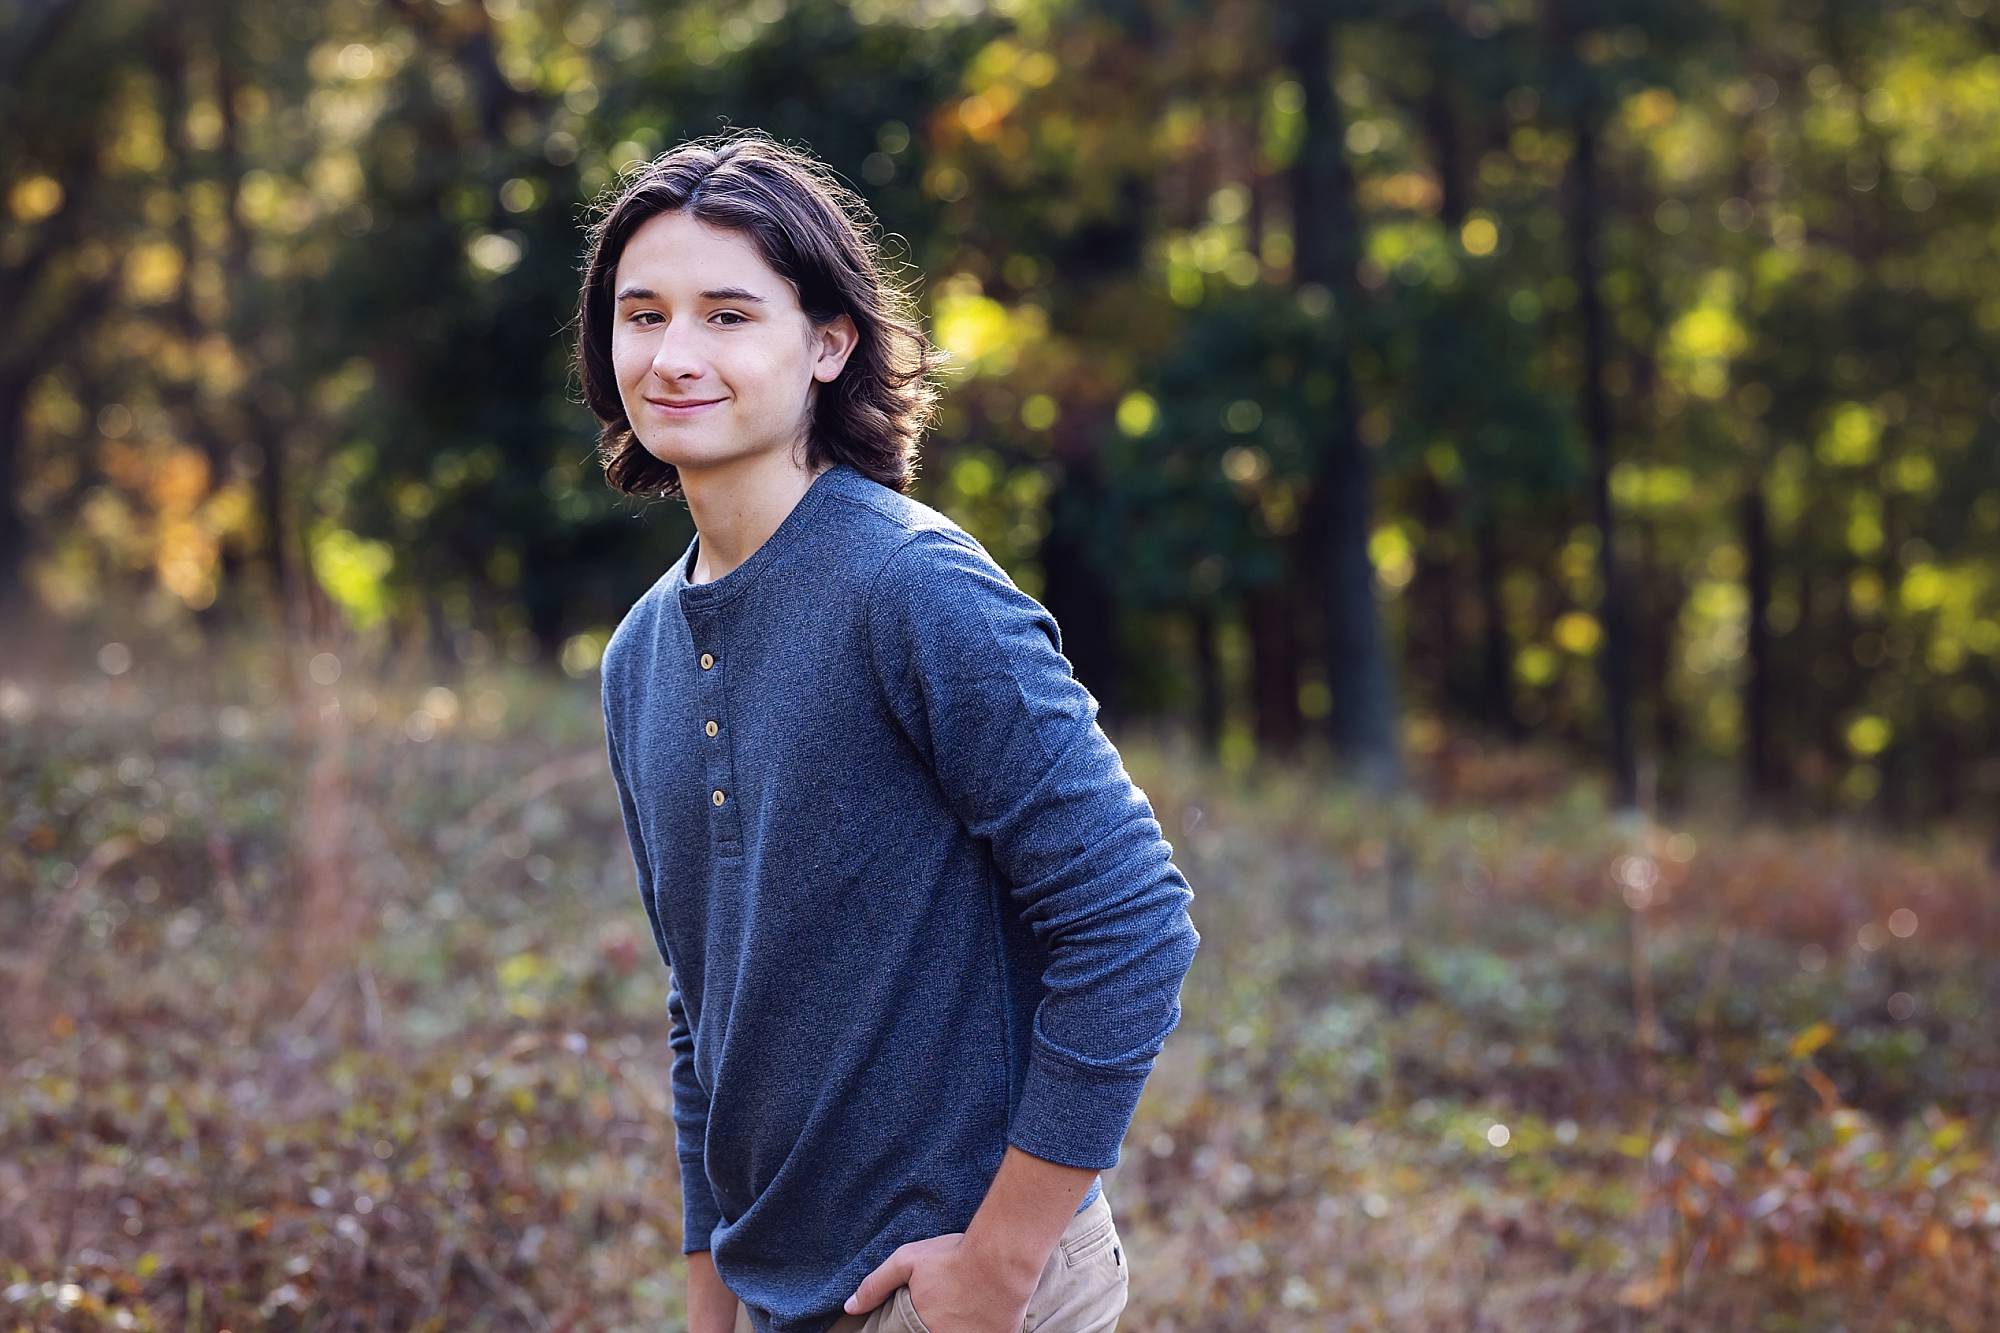 image of a senior guy in a blue henley shirt. he has shoulder length dark wavy hair and is standing in a clearing with a line of trees behind him.